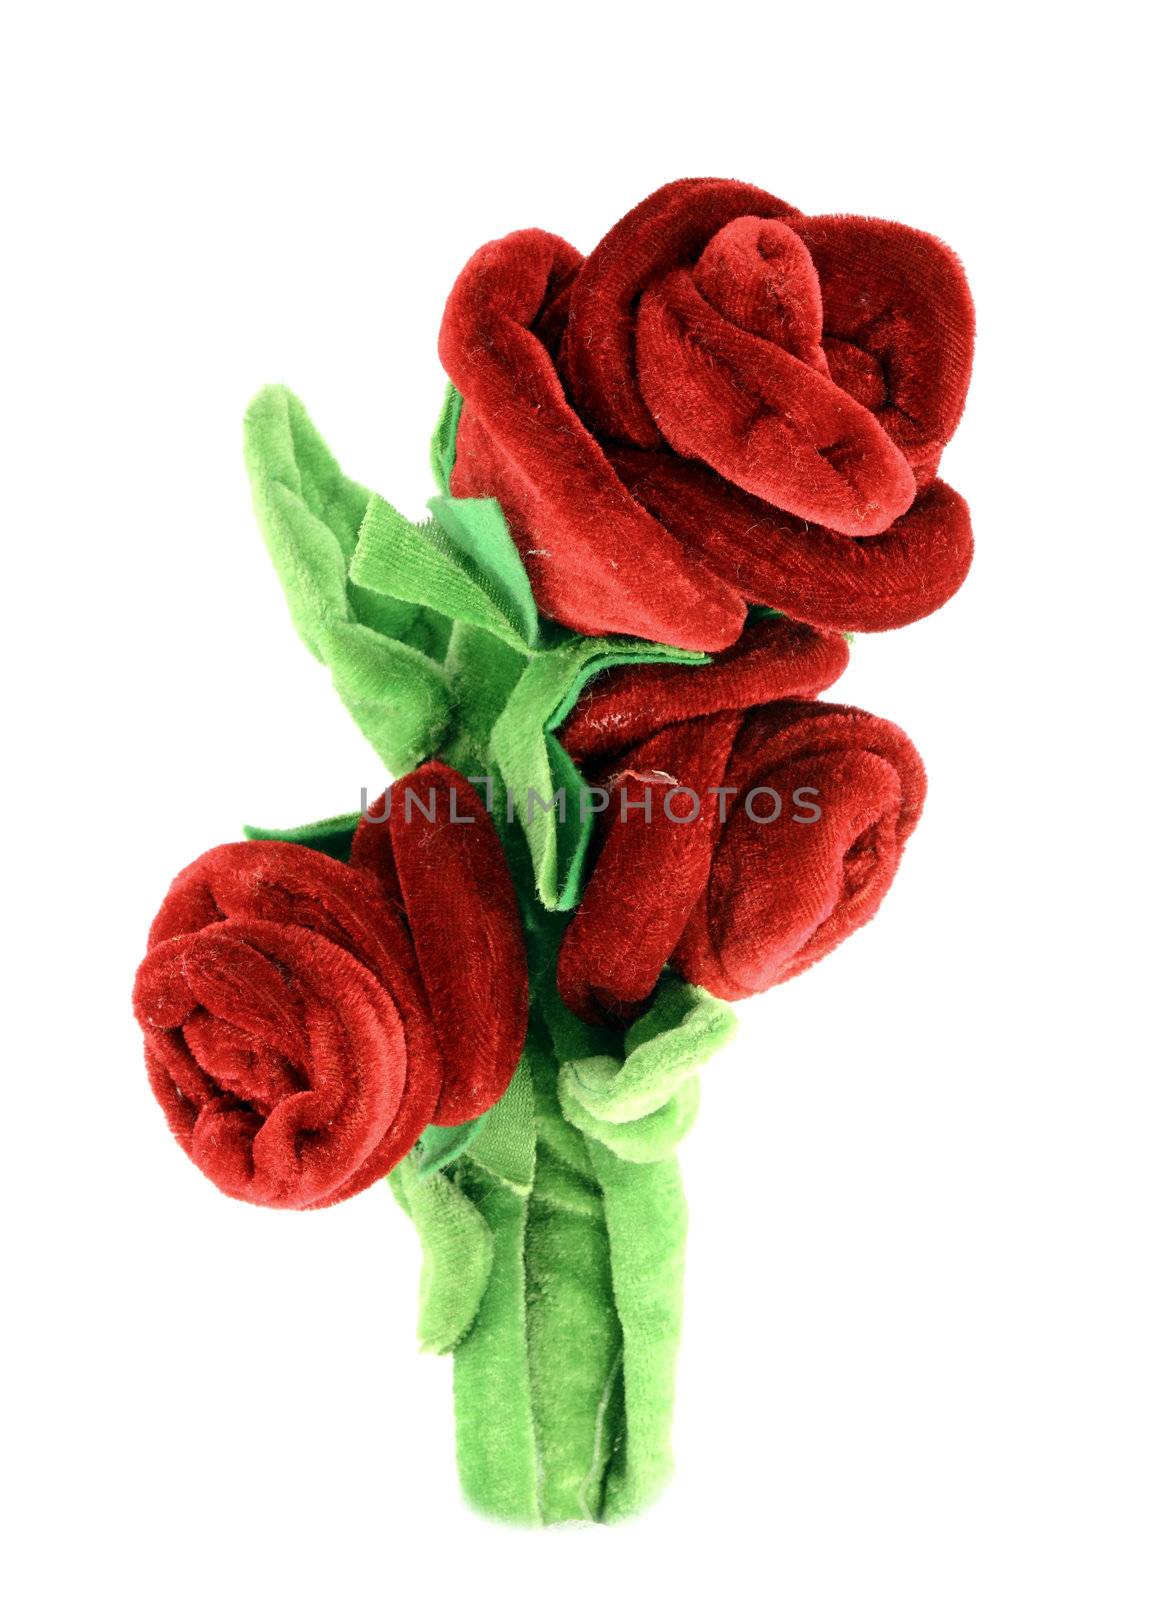 Rose made from wool fabric on white background by geargodz